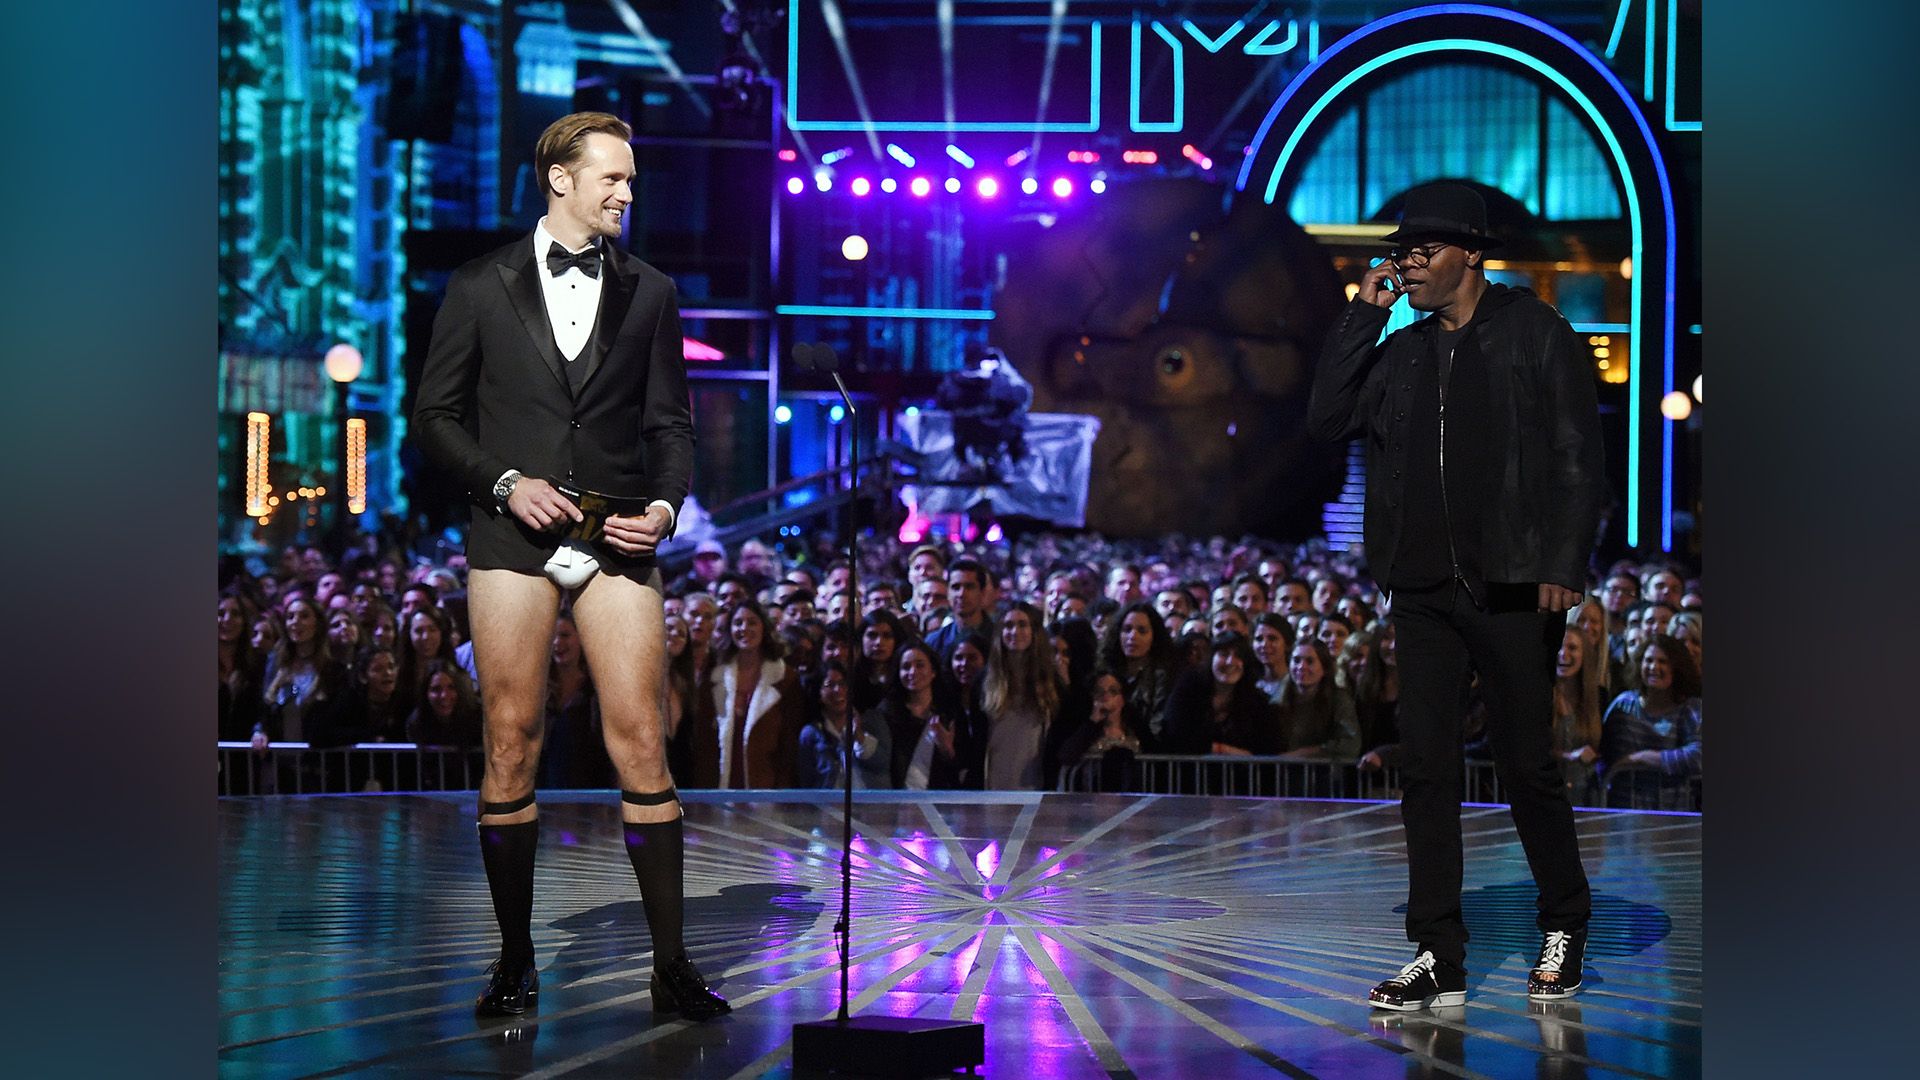 In 2016, Alexander Skarsgård appeared on the stage without his pants